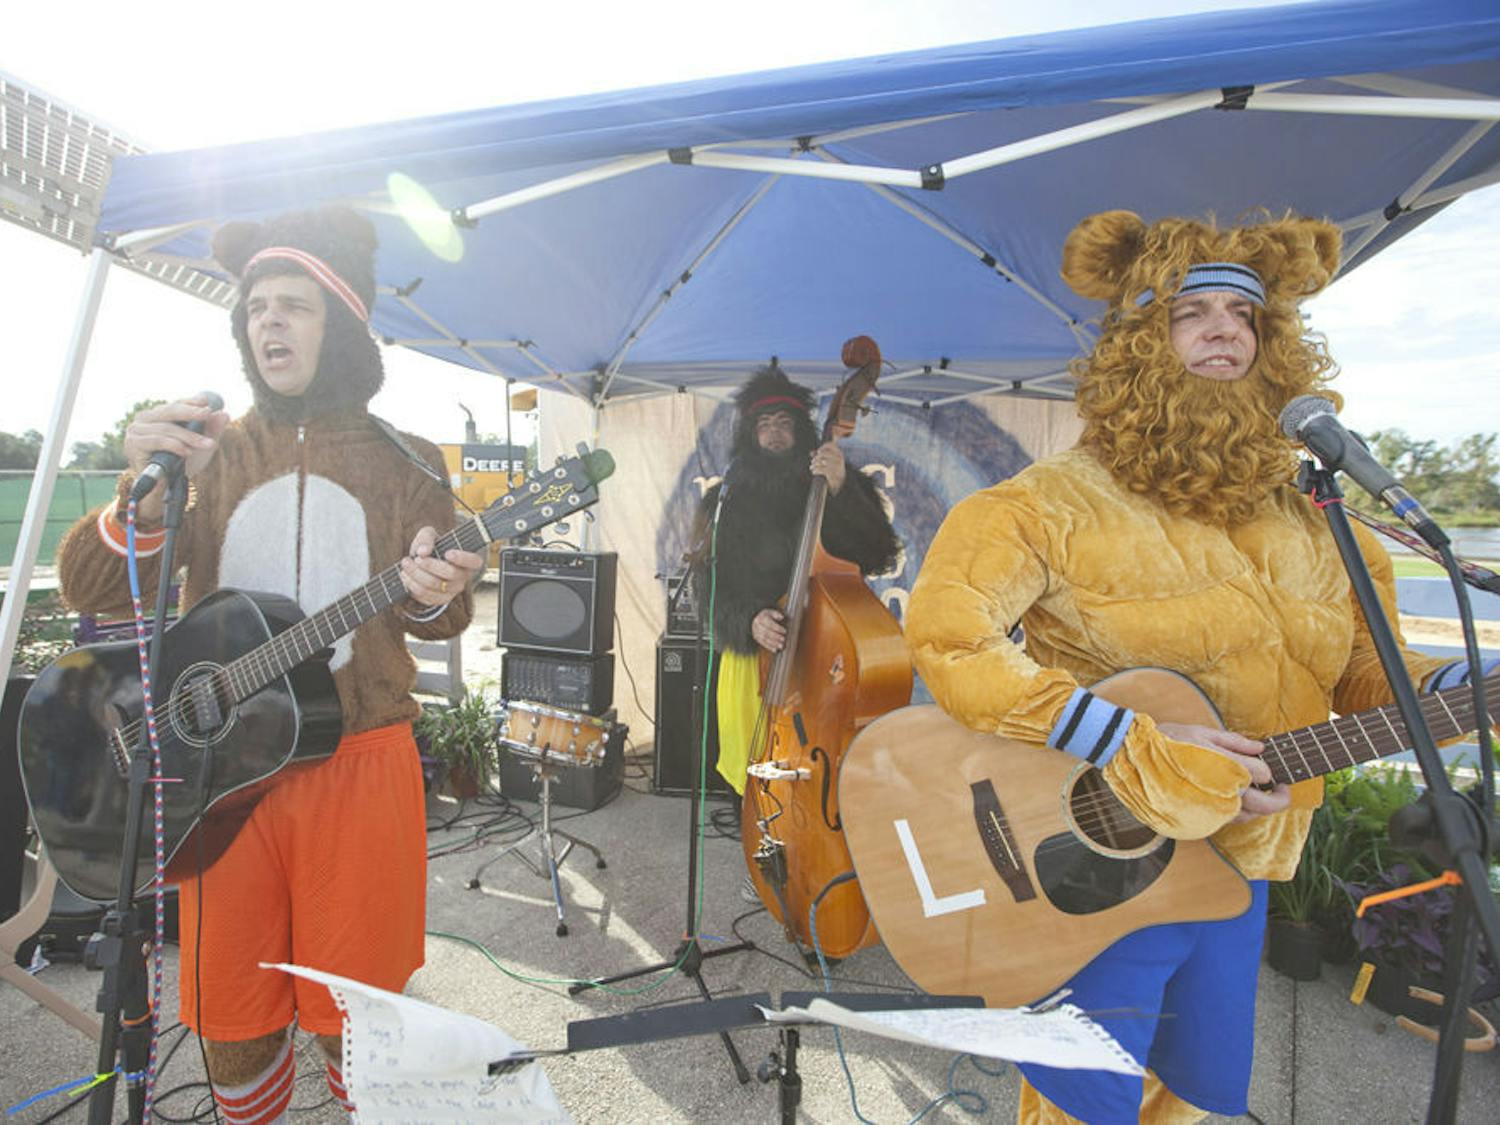 Opening performers, Bears and Lions, sing an original song written for the Depot Park groundbreaking event on Sept. 2, 2015.